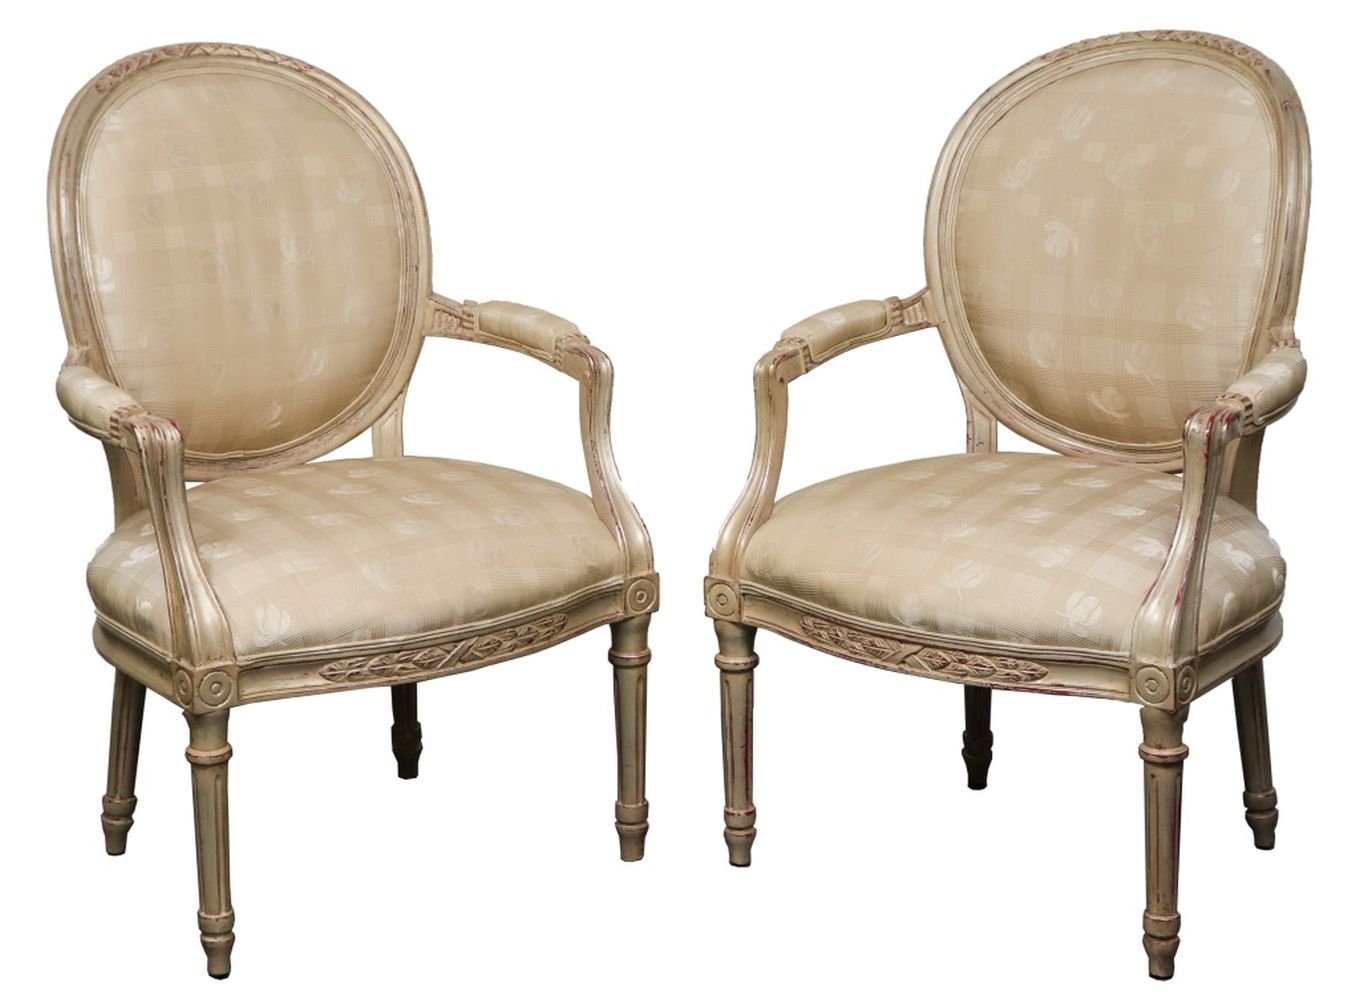 FRENCH LOUIS XVI MANNER FAUTEUILS  2fcaf5